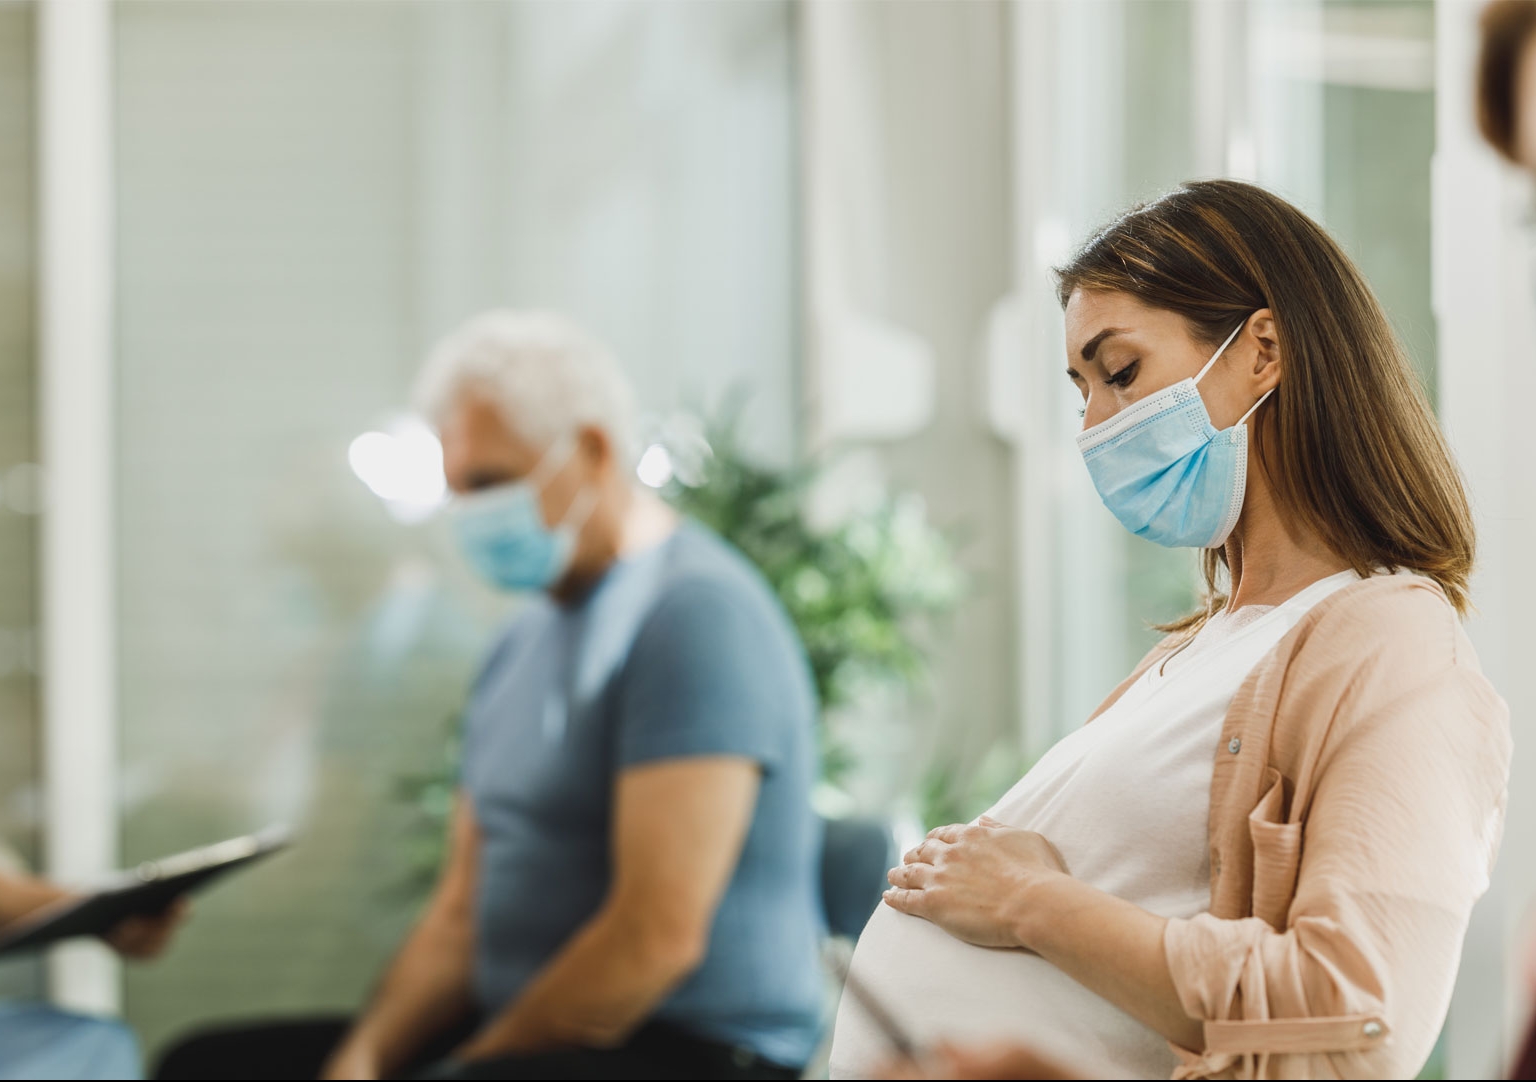 The researchers involved in the study argue more support is urgently needed for pregnant people’s mental health as part of standard pregnancy care. Photo: Shutterstock/ MilanMarkovic78